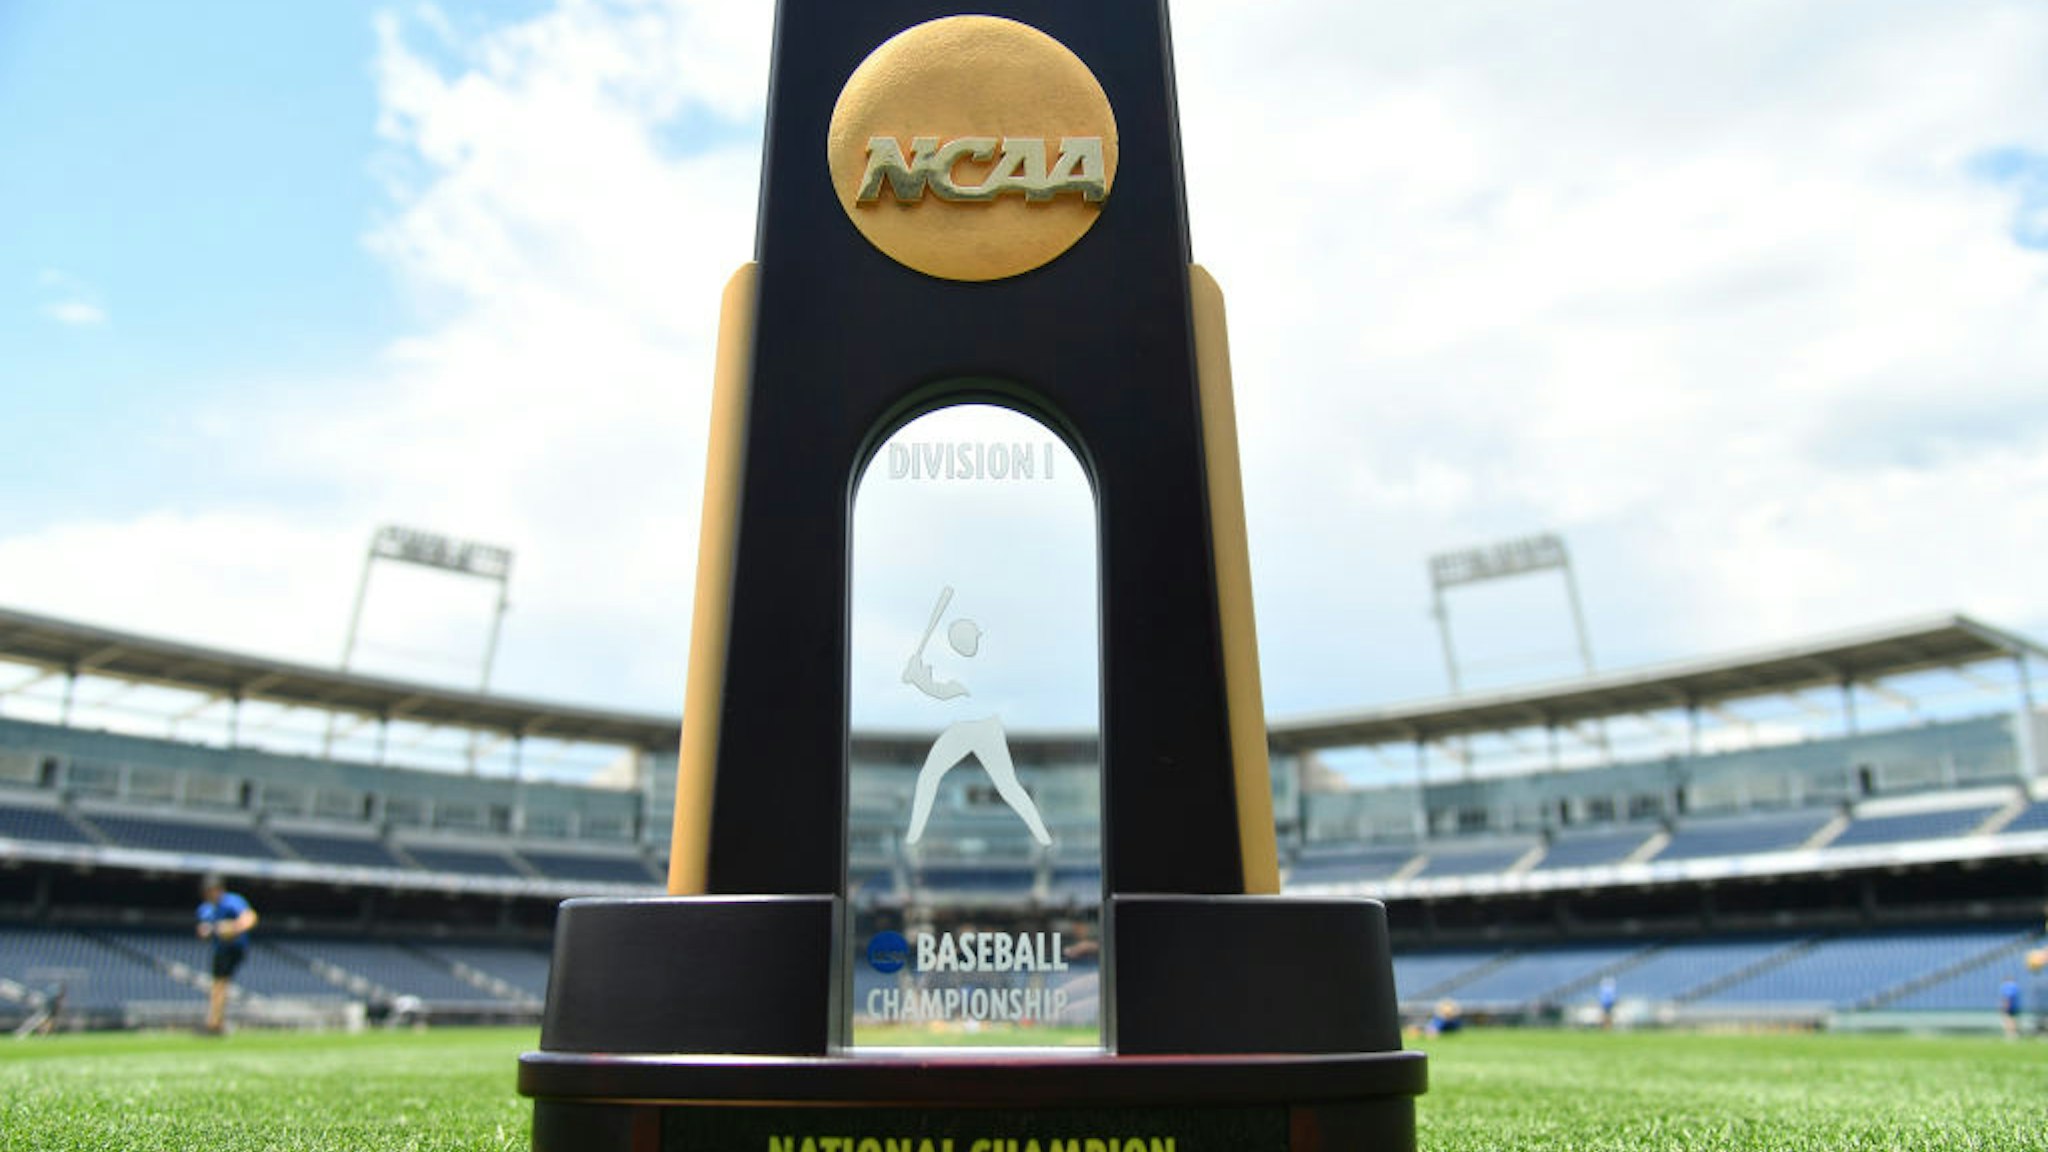 OMAHA, NE - JUNE 25: The national championship trophy is seen during the Division I Men's Baseball Championship held at TD Ameritrade Park Omaha on June 25, 2019 in Omaha, Nebraska. (Photo by Jamie Schwaberow/NCAA Photos via Getty Images)